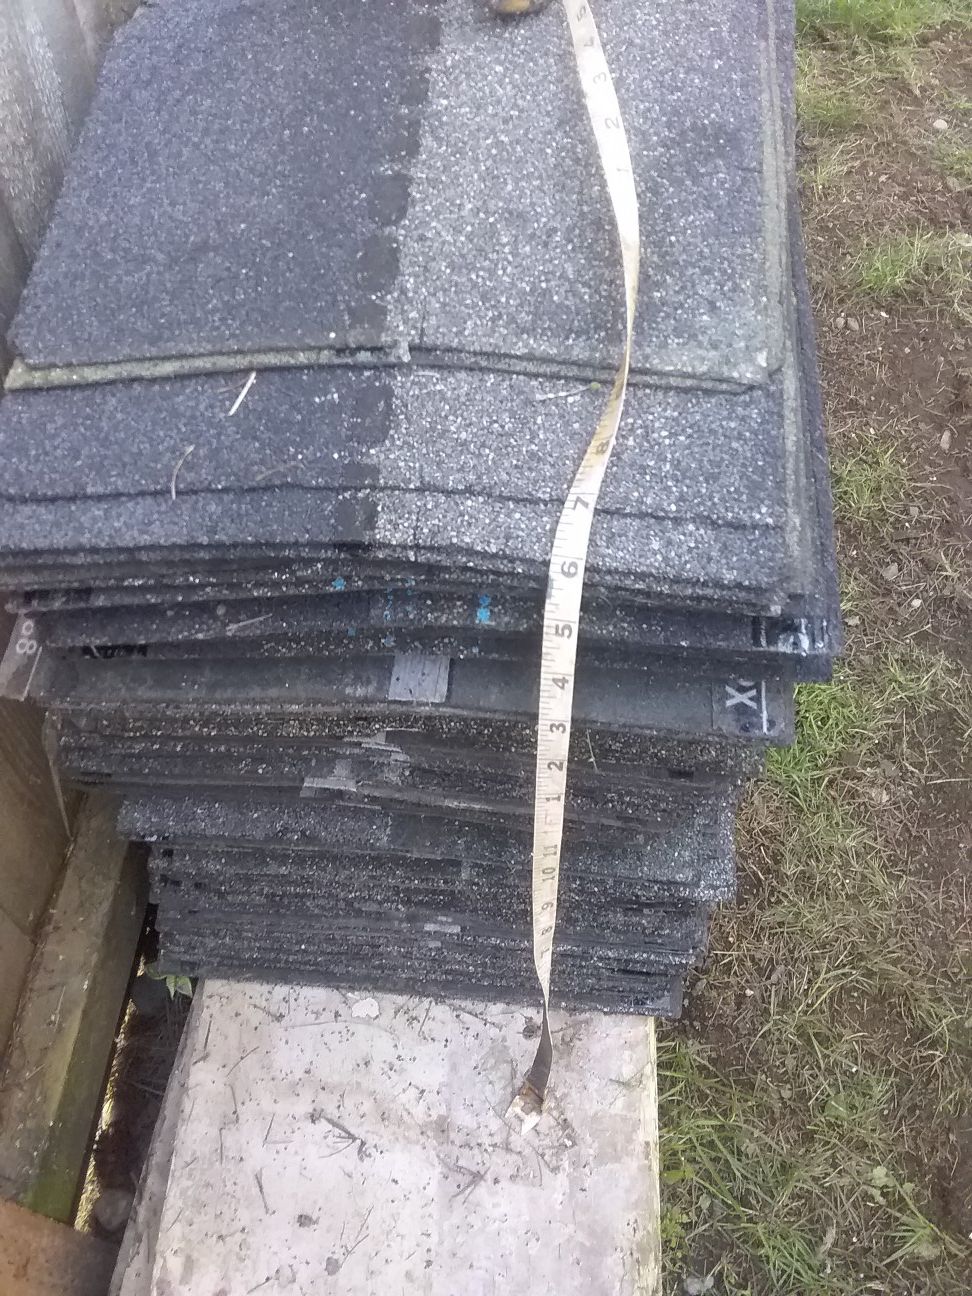 Pile of leftover roofing shingles ridge cap architectural shingles and starter